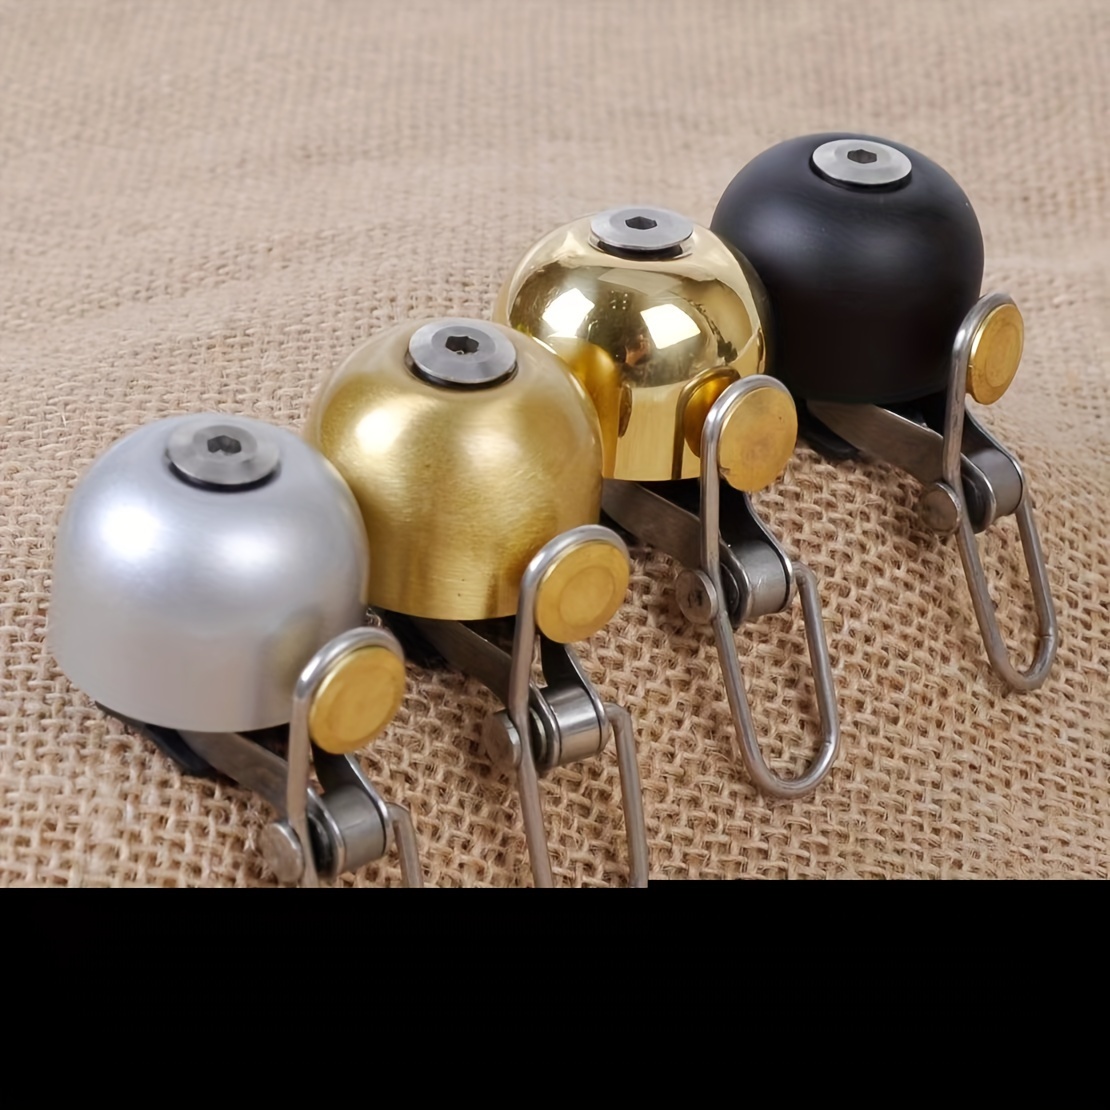 

1pc Vintage Style Bicycle Bell, Retro Classical Design, Clear Loud Sound, Copper & Steel Construction, For Mtb Mountain Bike, Safety Handlebar Ring Horn, Cycling Warning Alarm